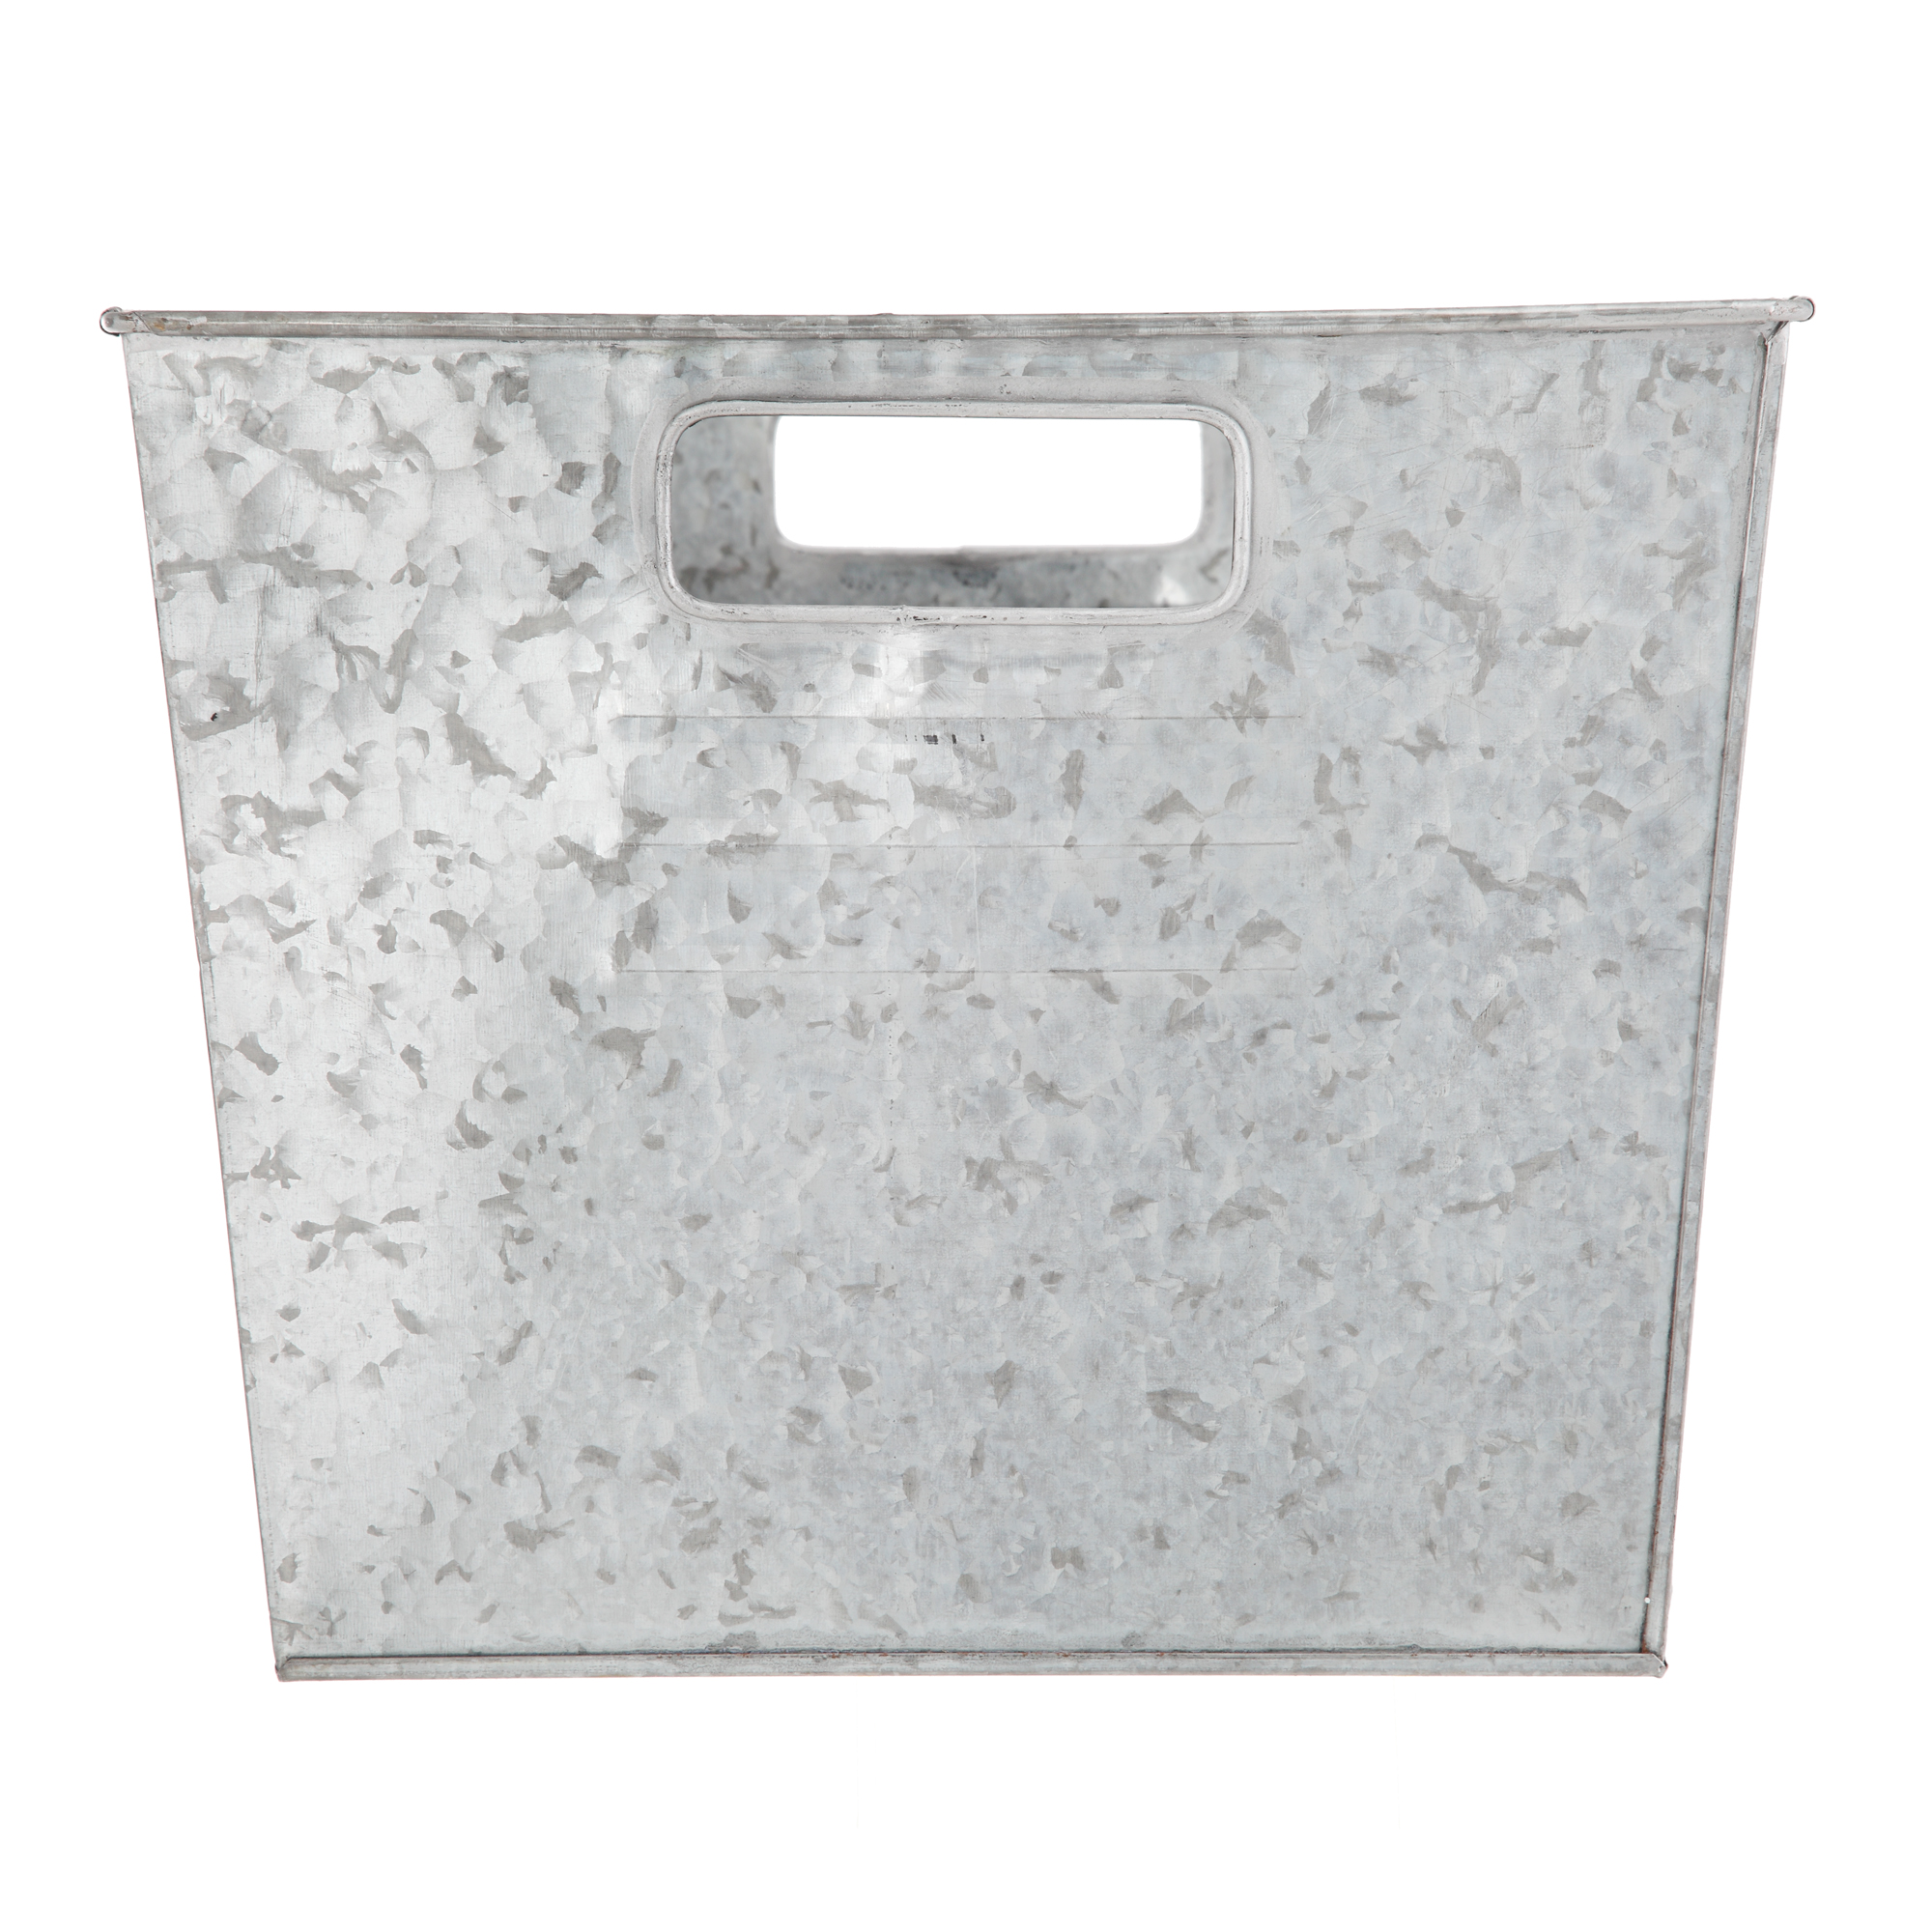 Better Homes and Gardens Small Galvanized Bin, Silver - image 5 of 6